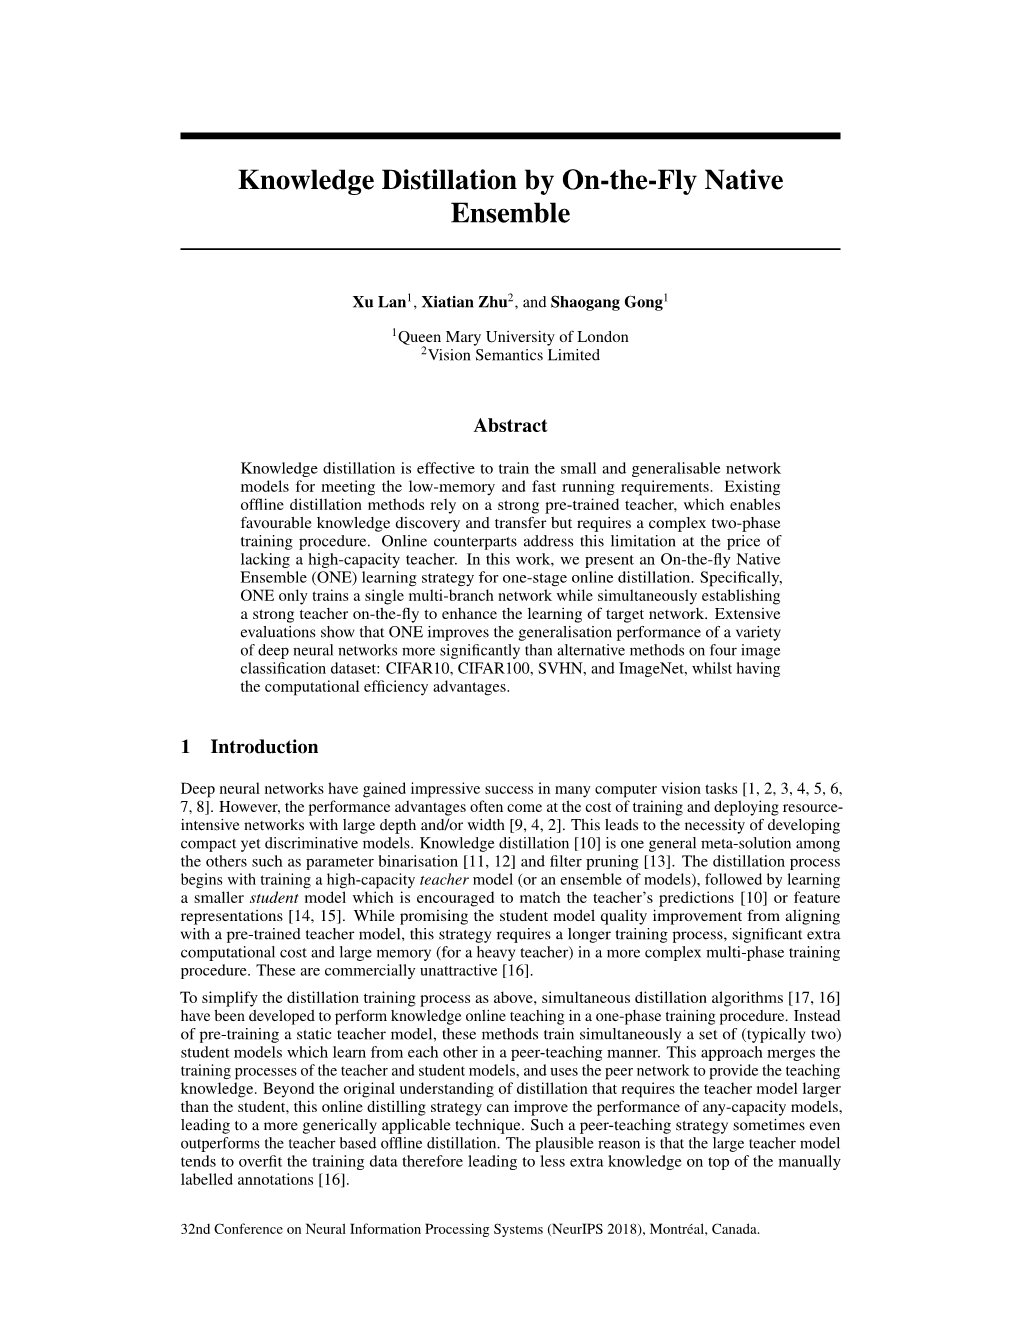 Knowledge Distillation by On-The-Fly Native Ensemble